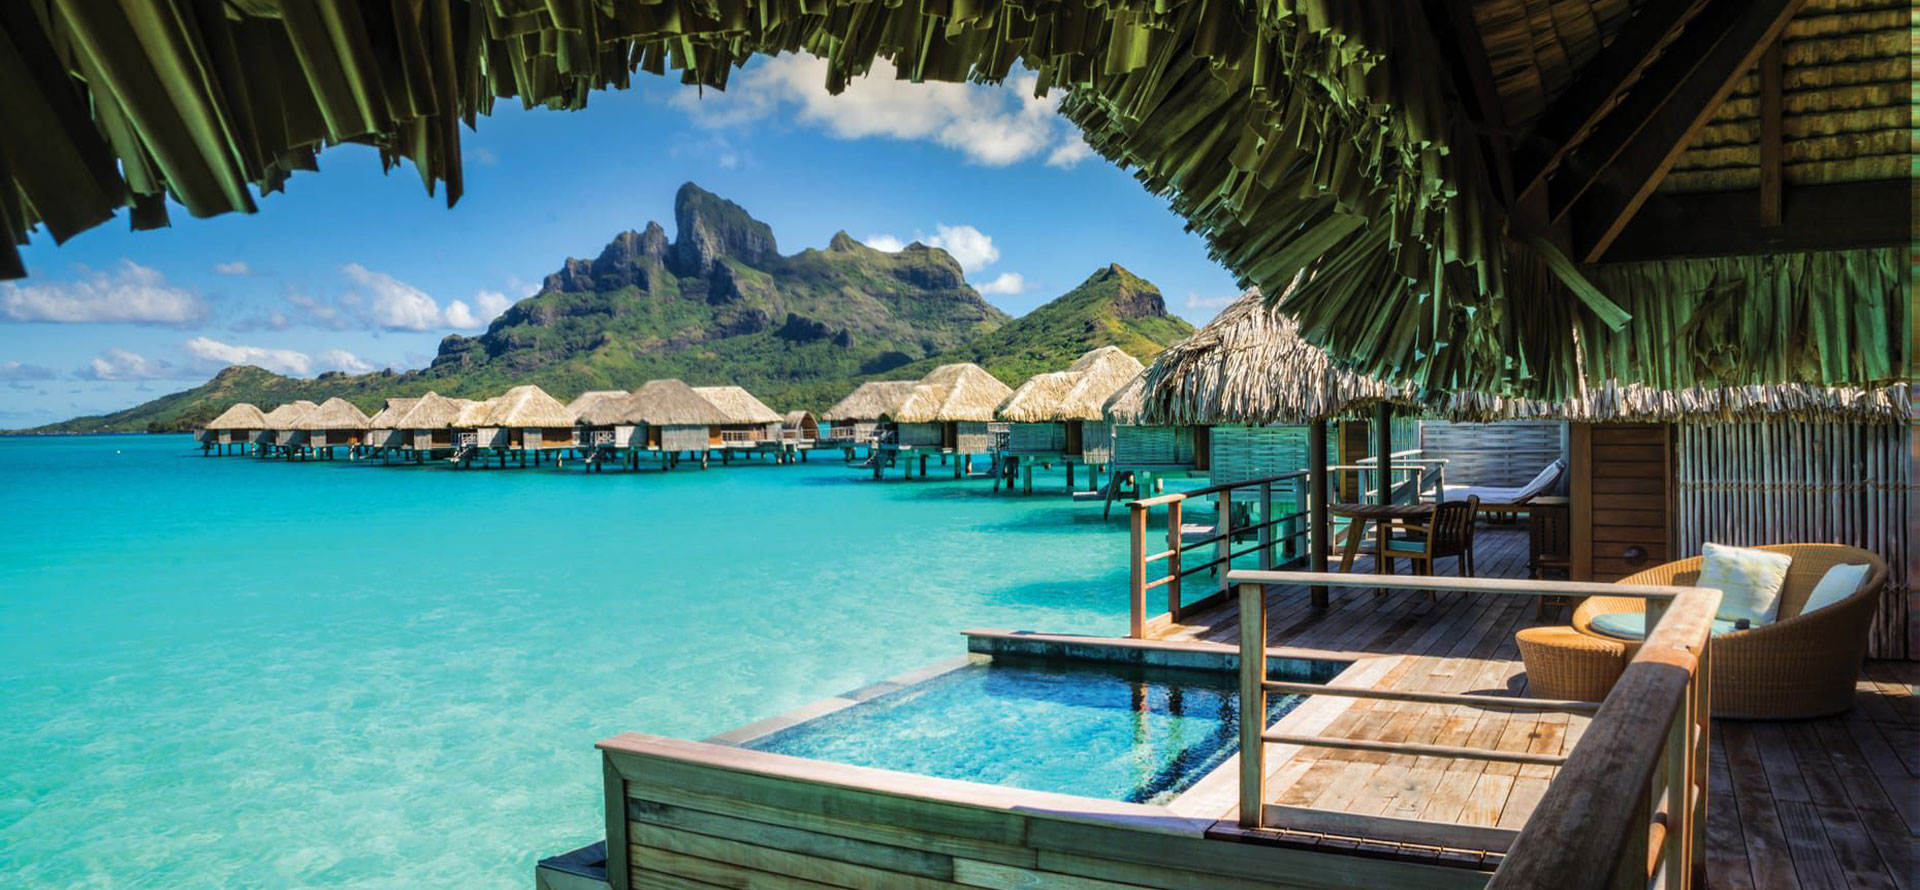 Overwater bungalows in the сaribbean with mountain view.